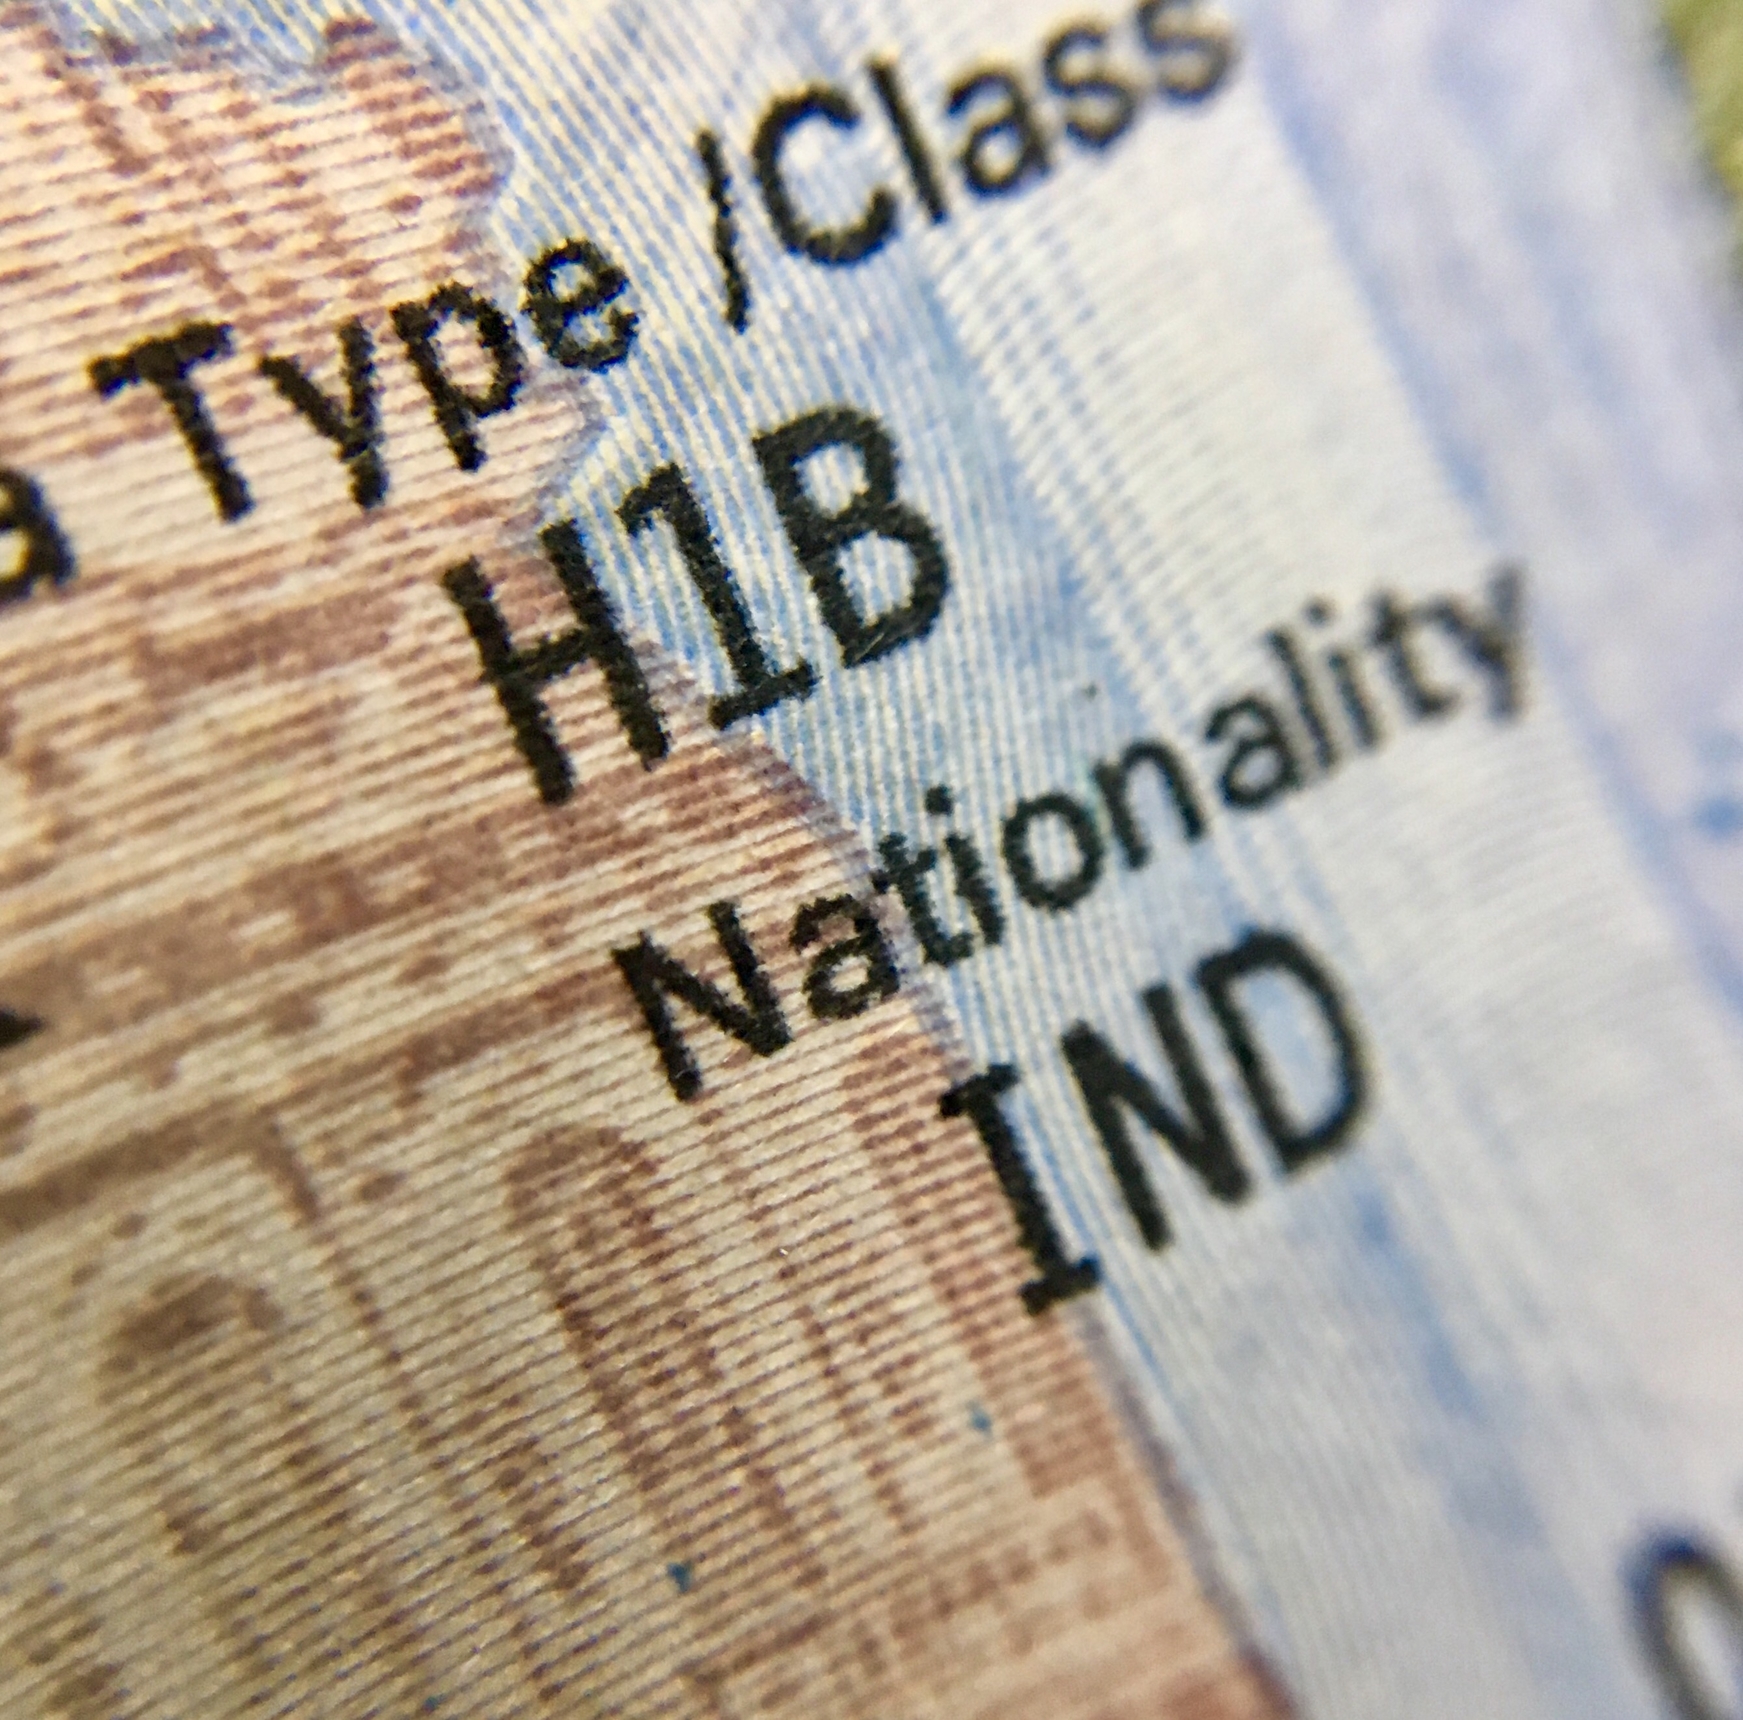 Arbitrary H-1B Nonimmigrant Visa Denials Have Employers Thinking Federal Litigation Rather Than Administrative Review